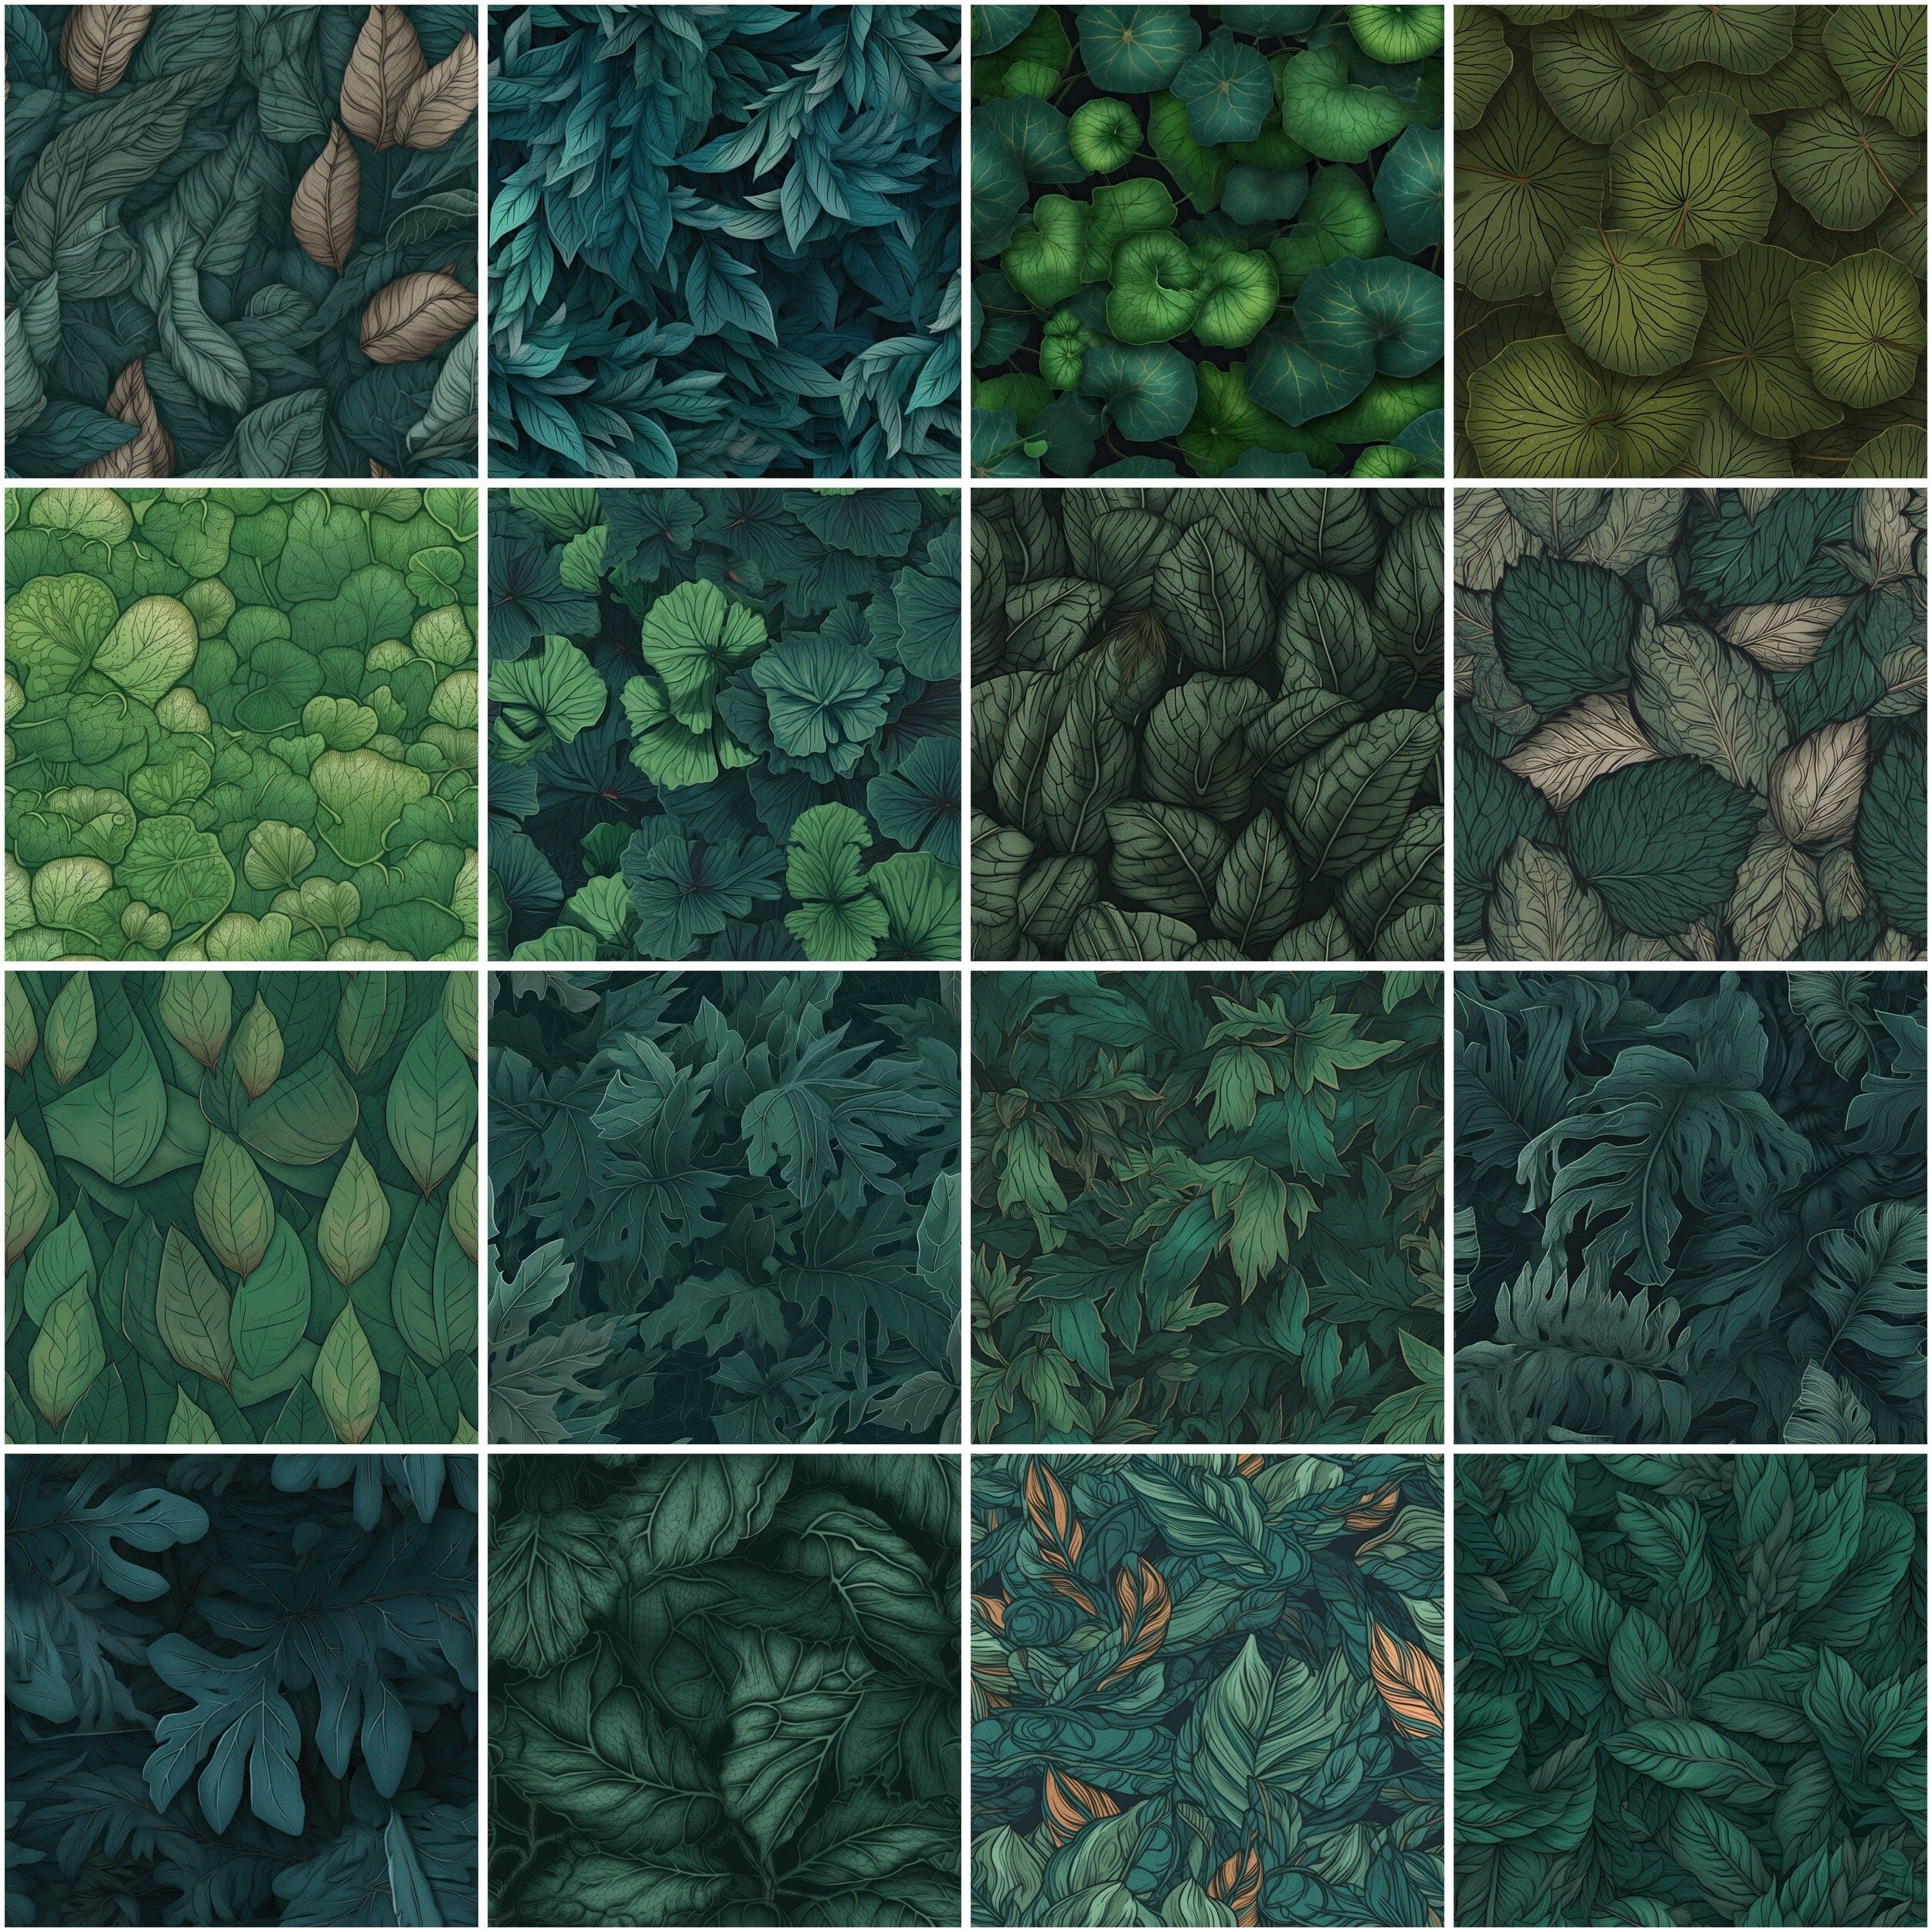 110 Foliage & Leaves Seamless Patterns Bundle - Digital Download for Design Projects, Scrapbooking, Wrapping, Invitations - Commercial use Digital Download Sumobundle